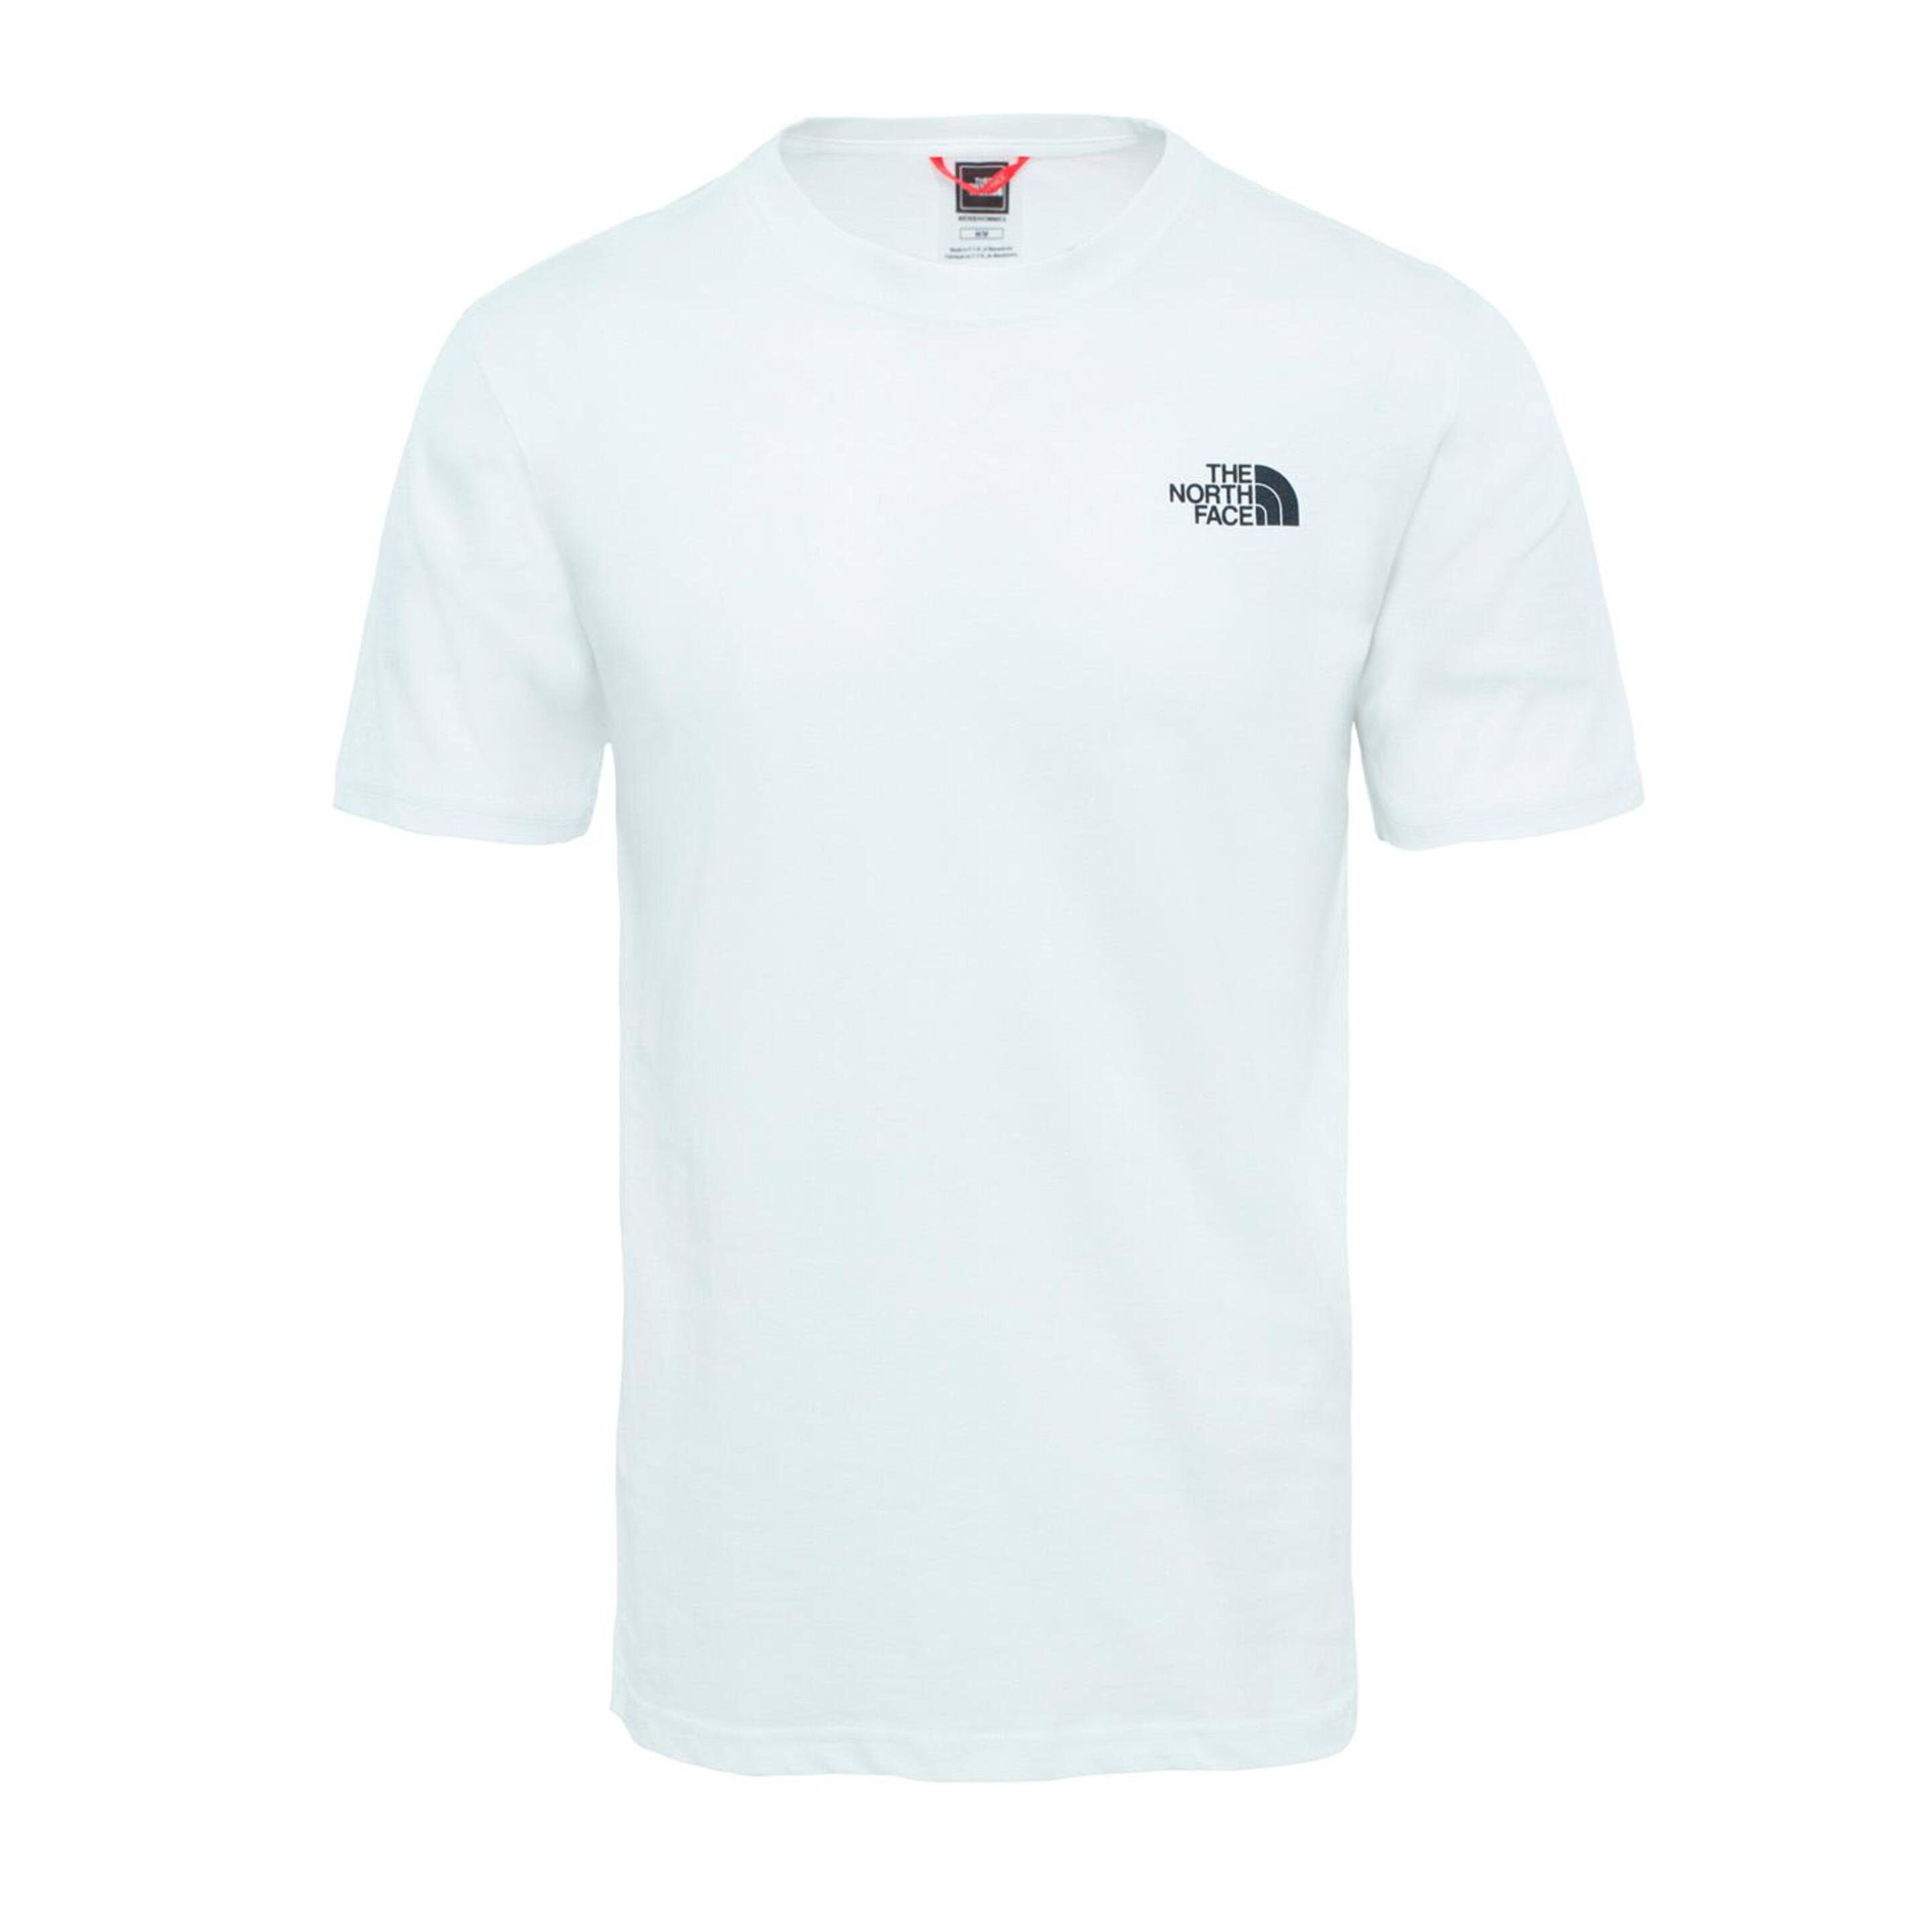 Camiseta The North Face Red Box W20